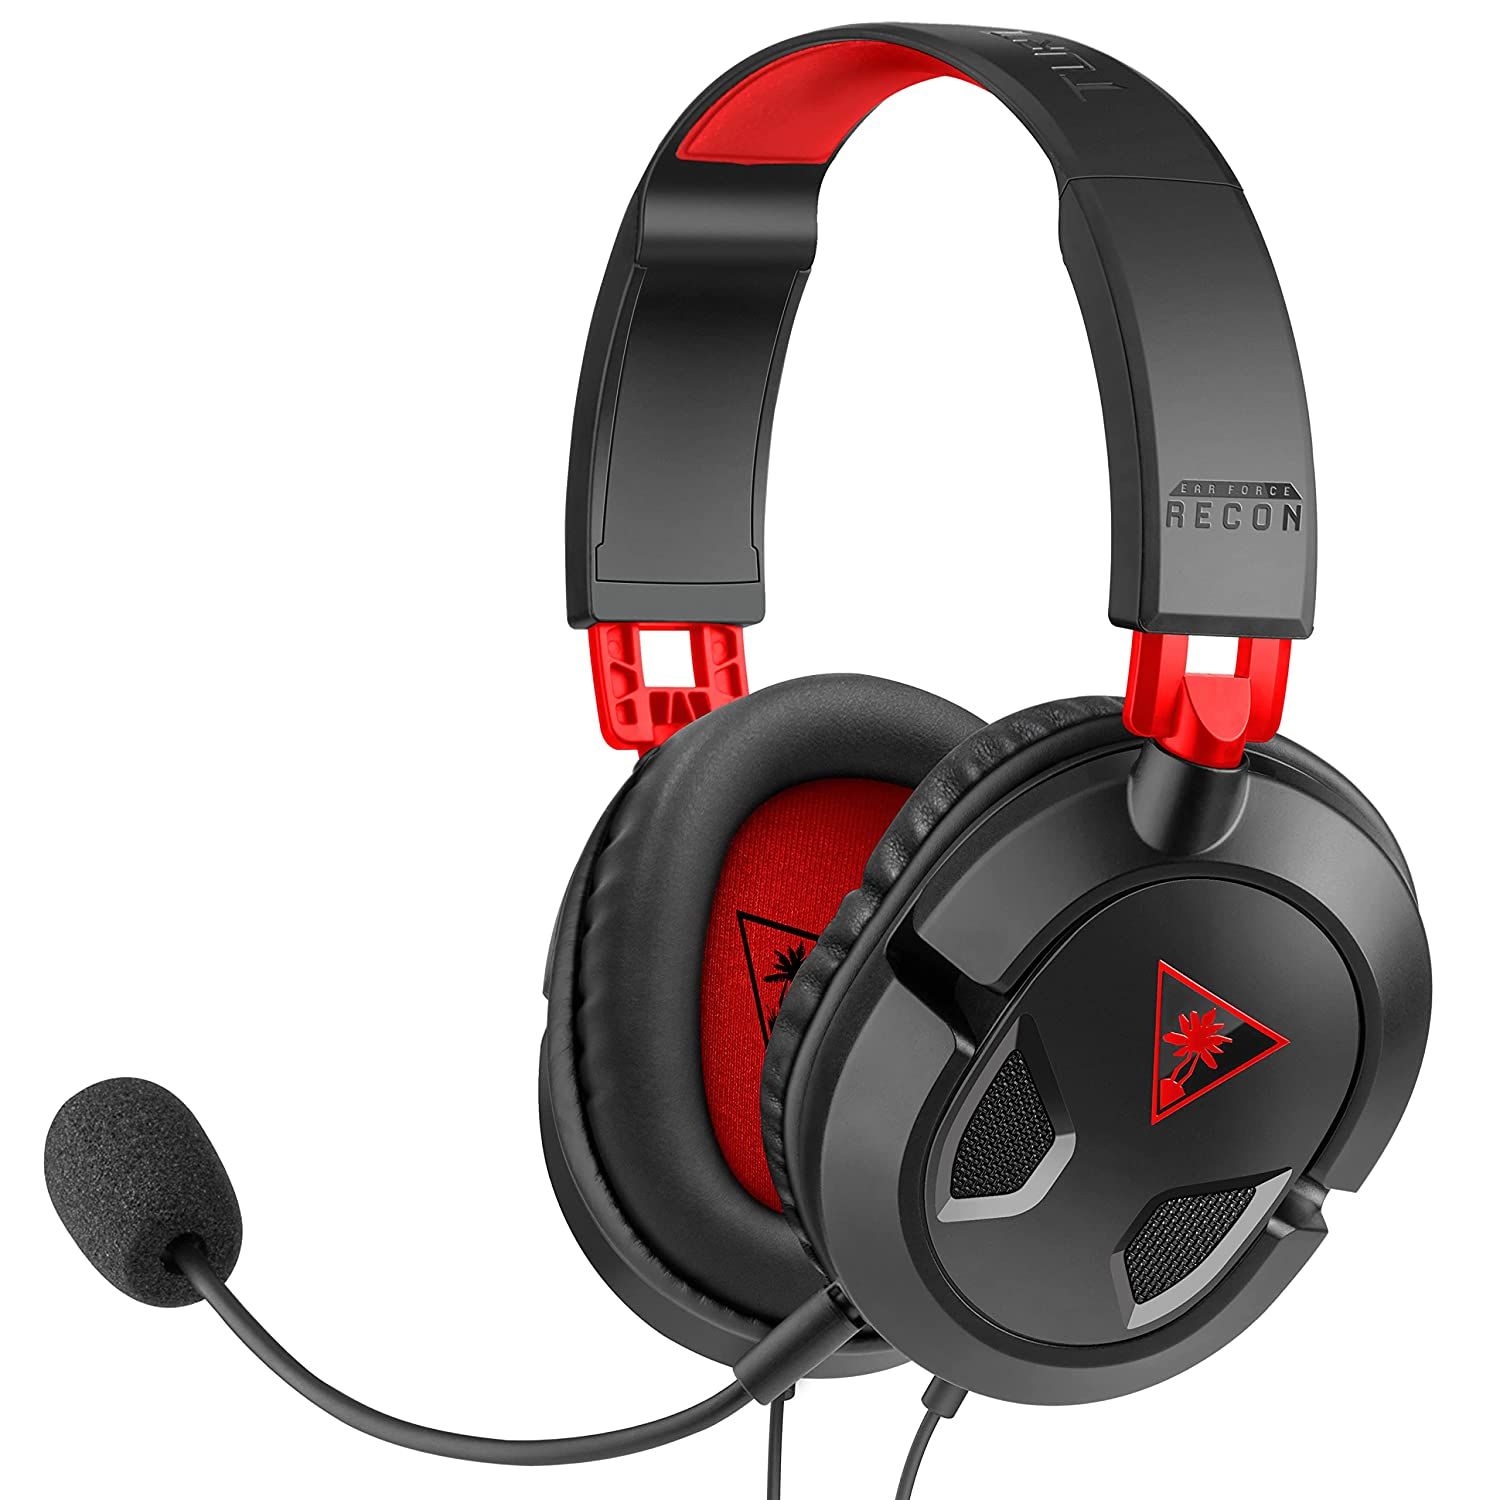 The Best Turtle Beach Headsets in 2023